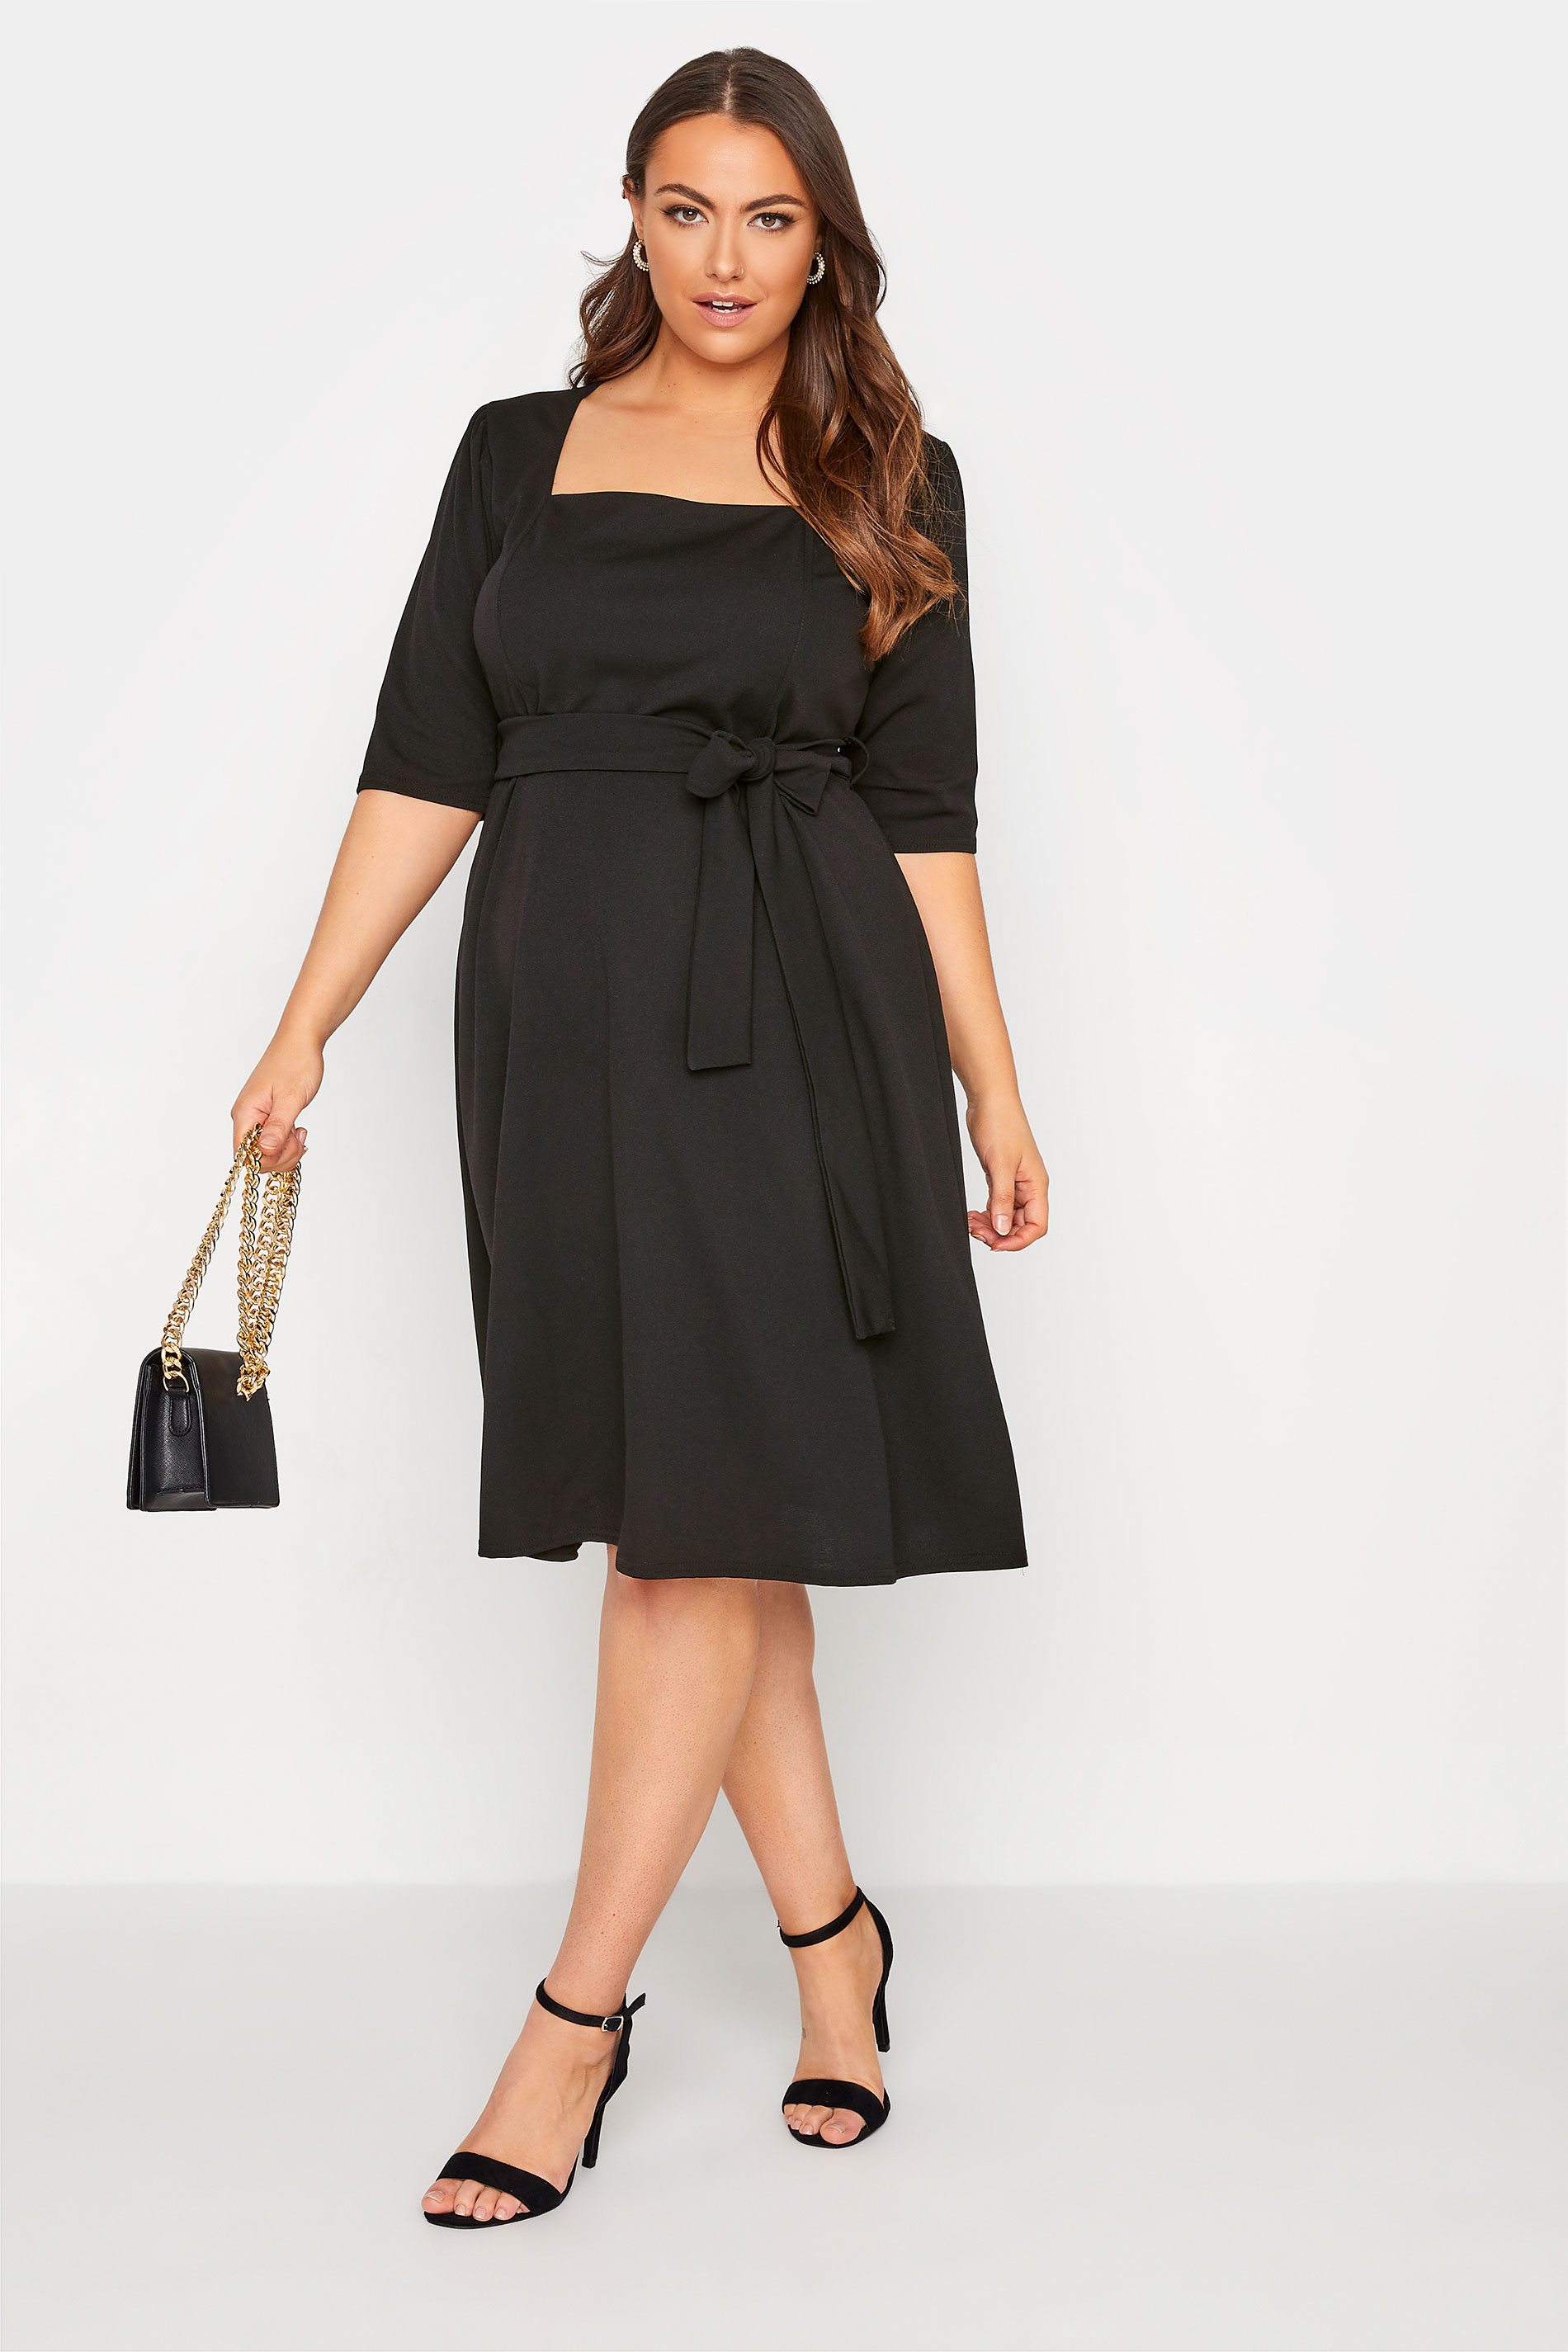 Robes Grande Taille Grande taille  Robes Noires | YOURS LONDON - Robe Noire Encolure Carrée - AE92841